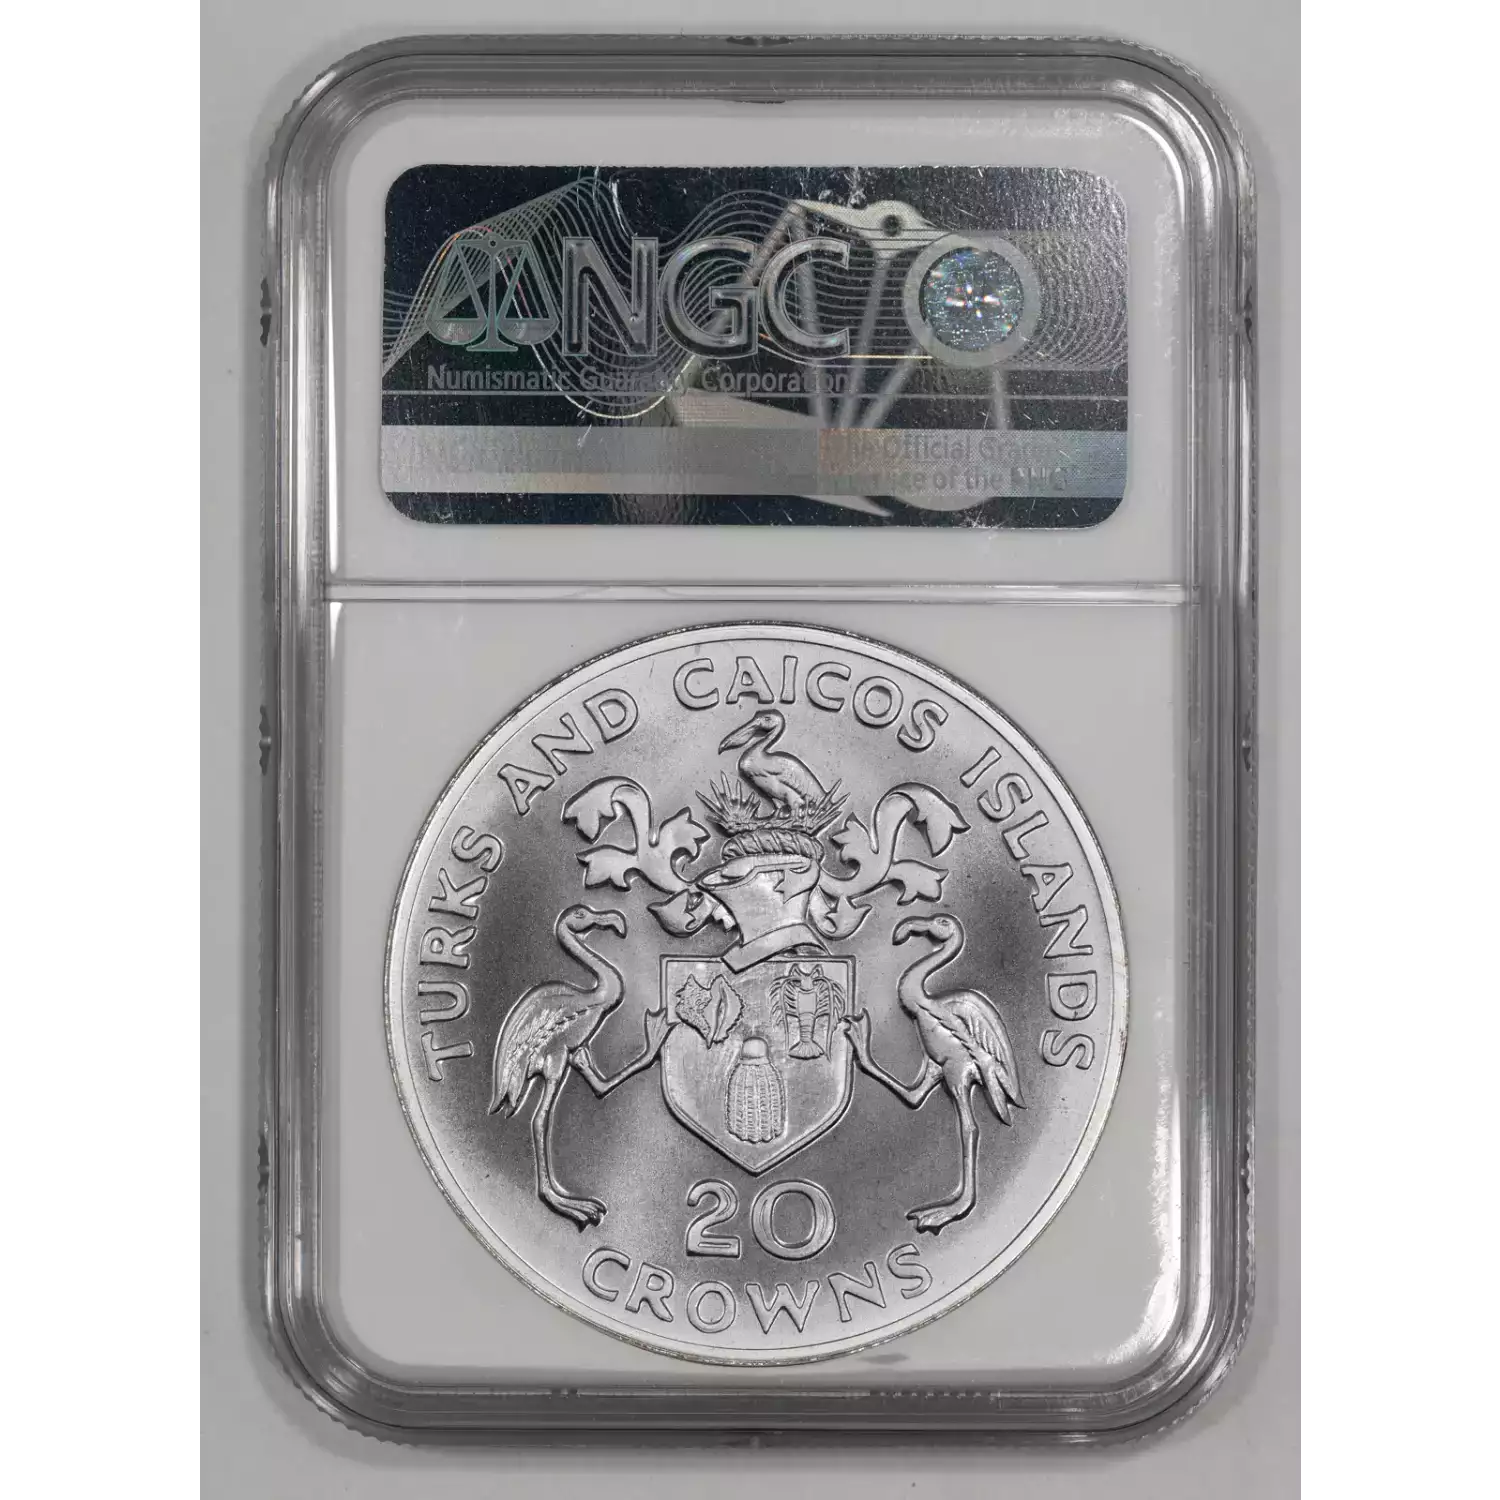 Turks and Caicos Islands Silver 20 CROWNS (4)